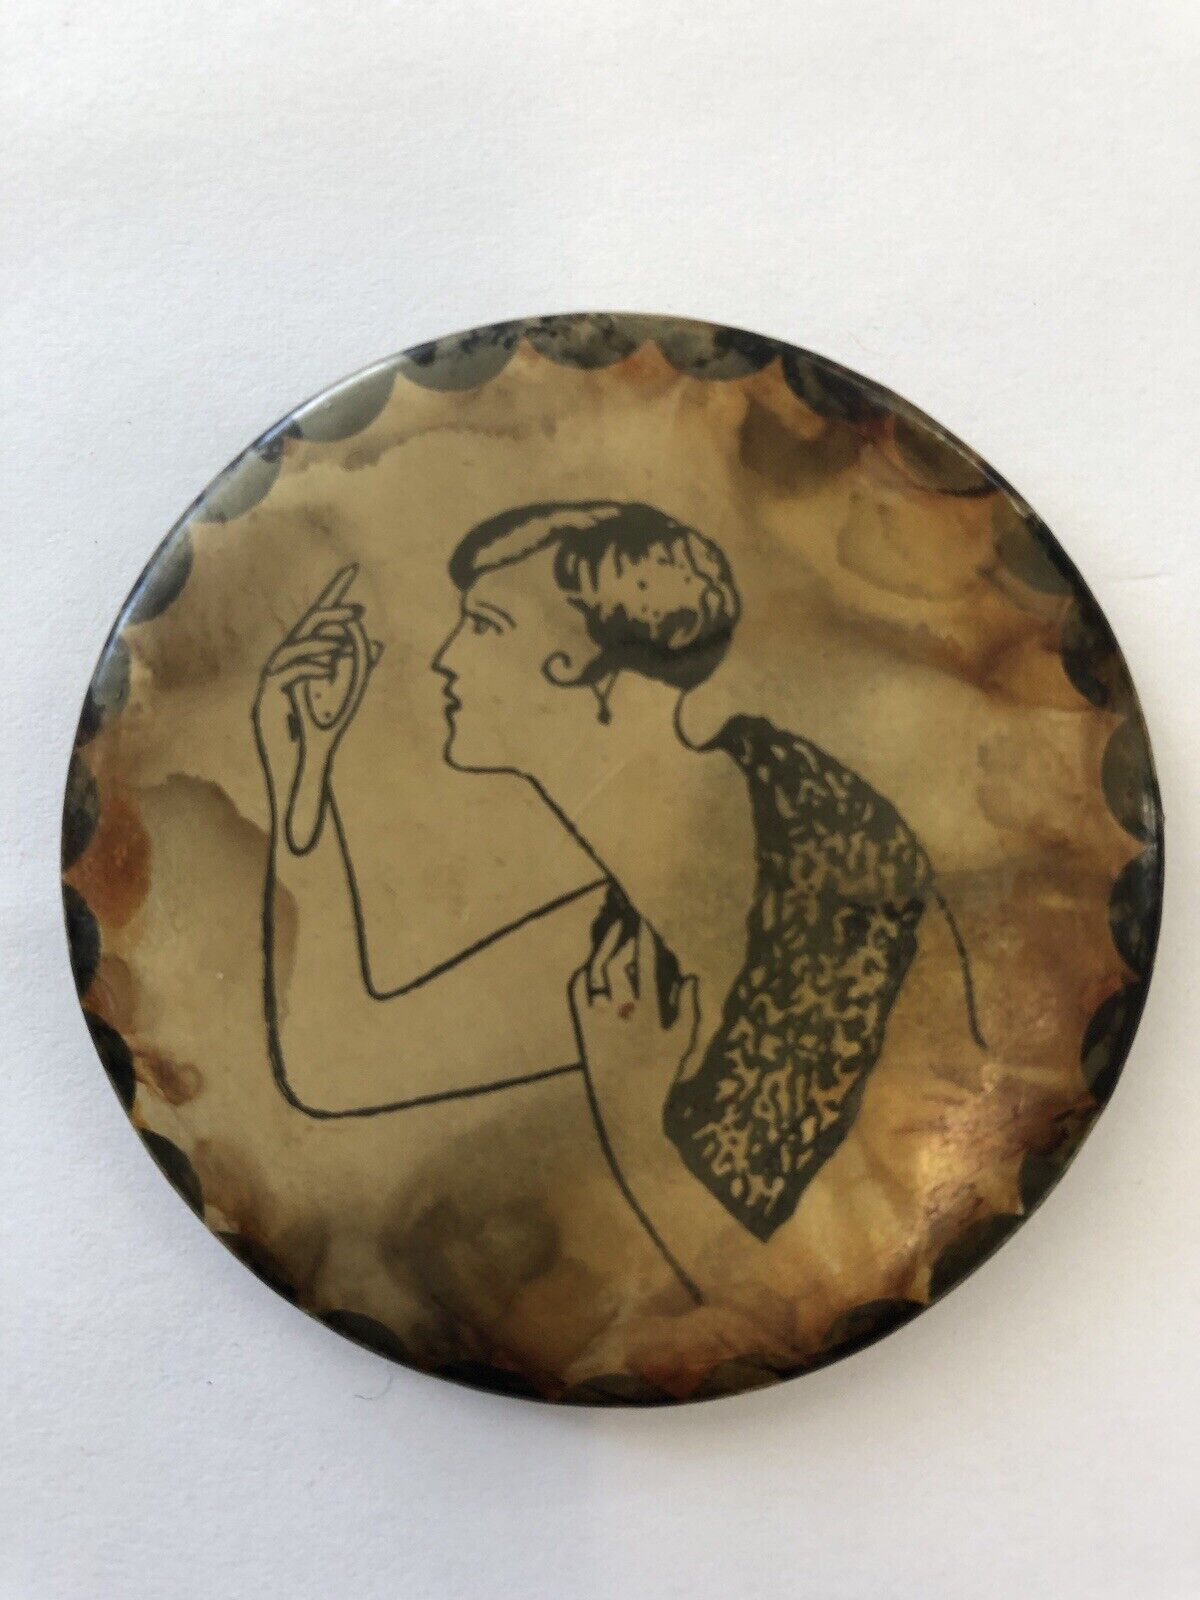 Vintage RARE 1920s Art Deco Compact Mirror Risque Image When Turned